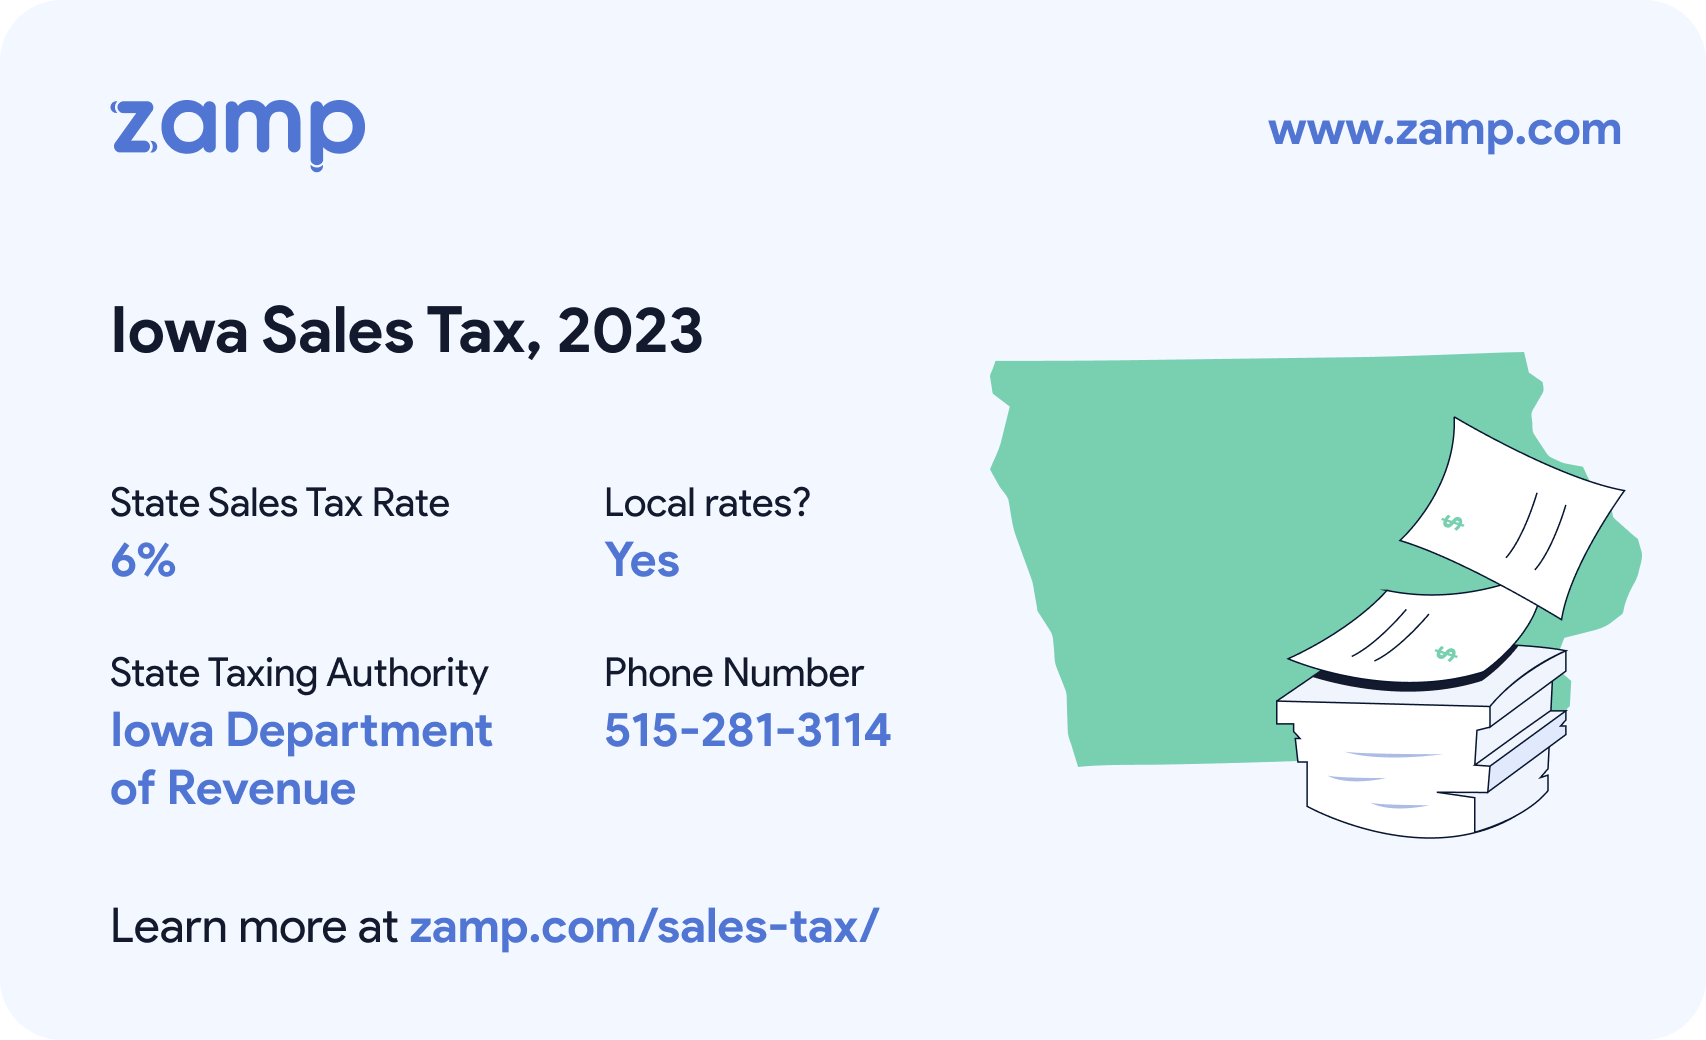 Iowa basic sales tax info for 2023 - State sales tax rate: 6%, Local rates? Yes; State Taxing Authority: Iowa Department of Revenue; and phone number 515-281-3114